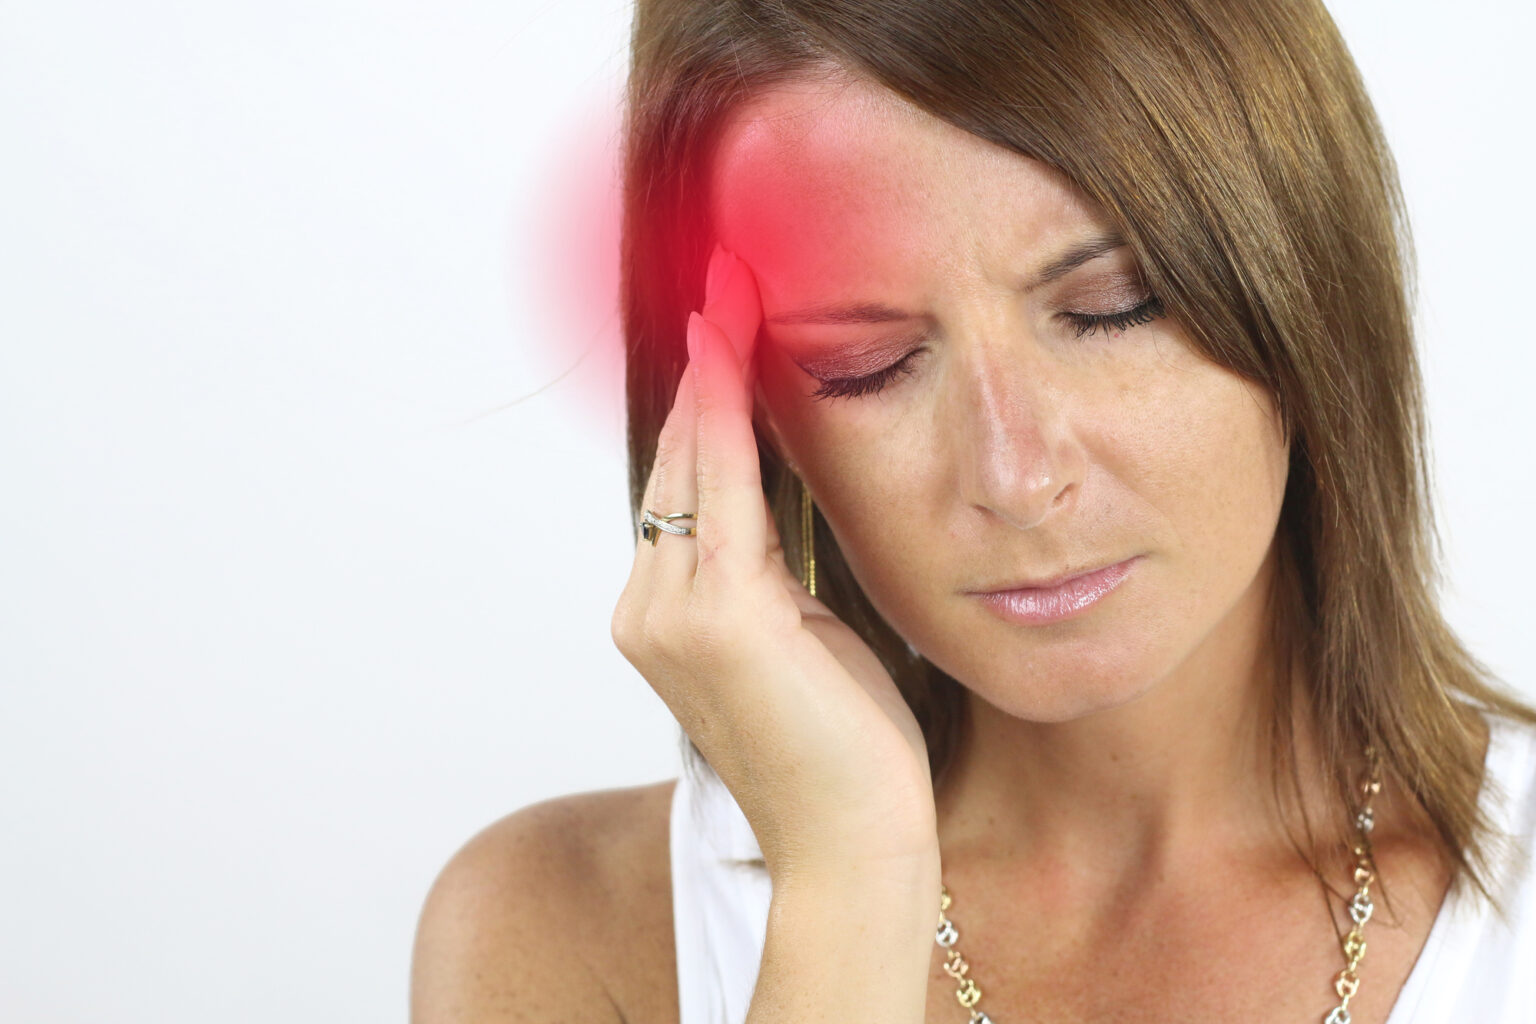 woman with migraine